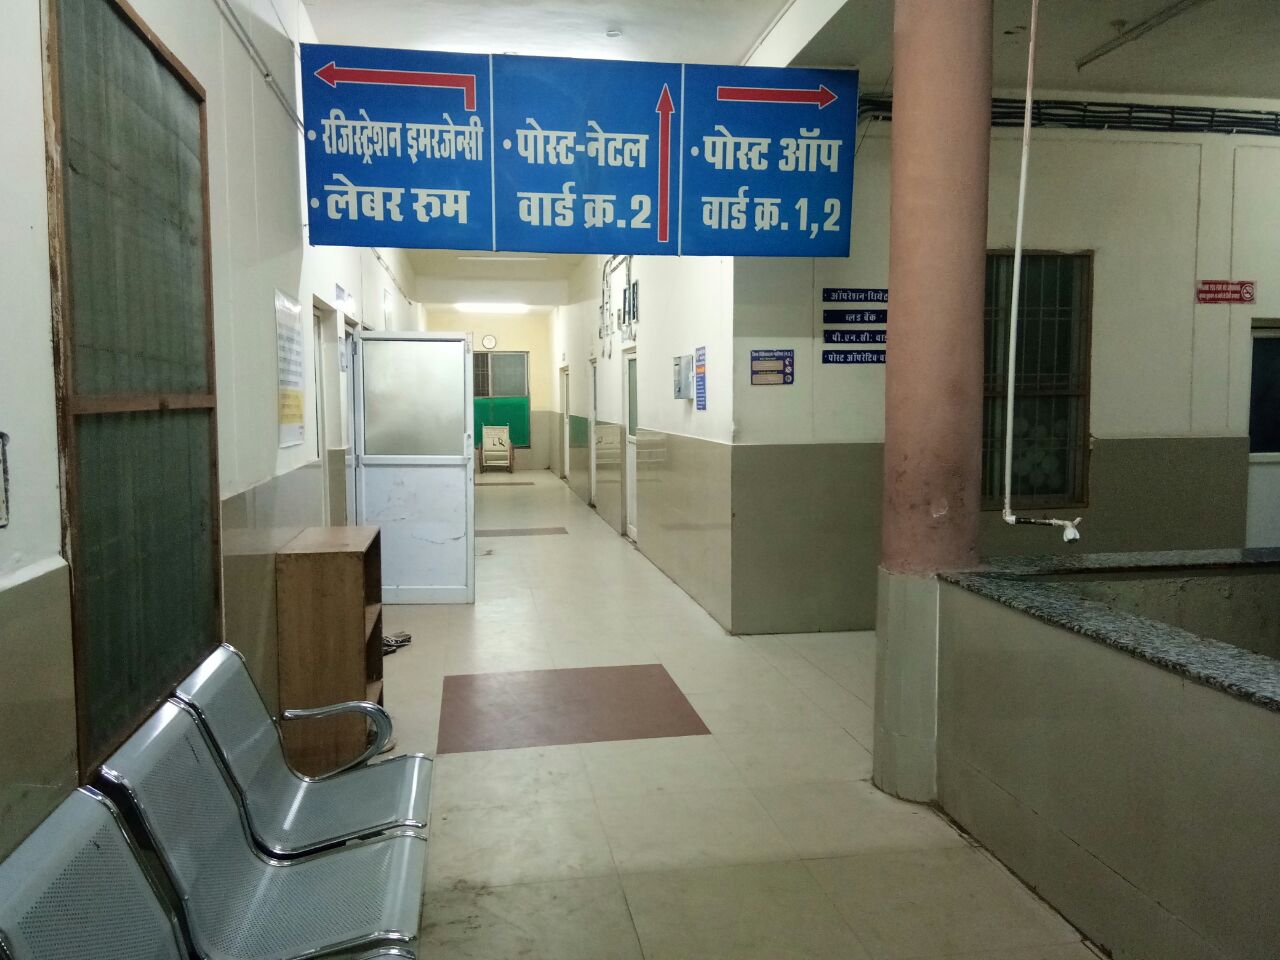 Lock in maternity planet, open attendant and doctors not seen in a single hospital